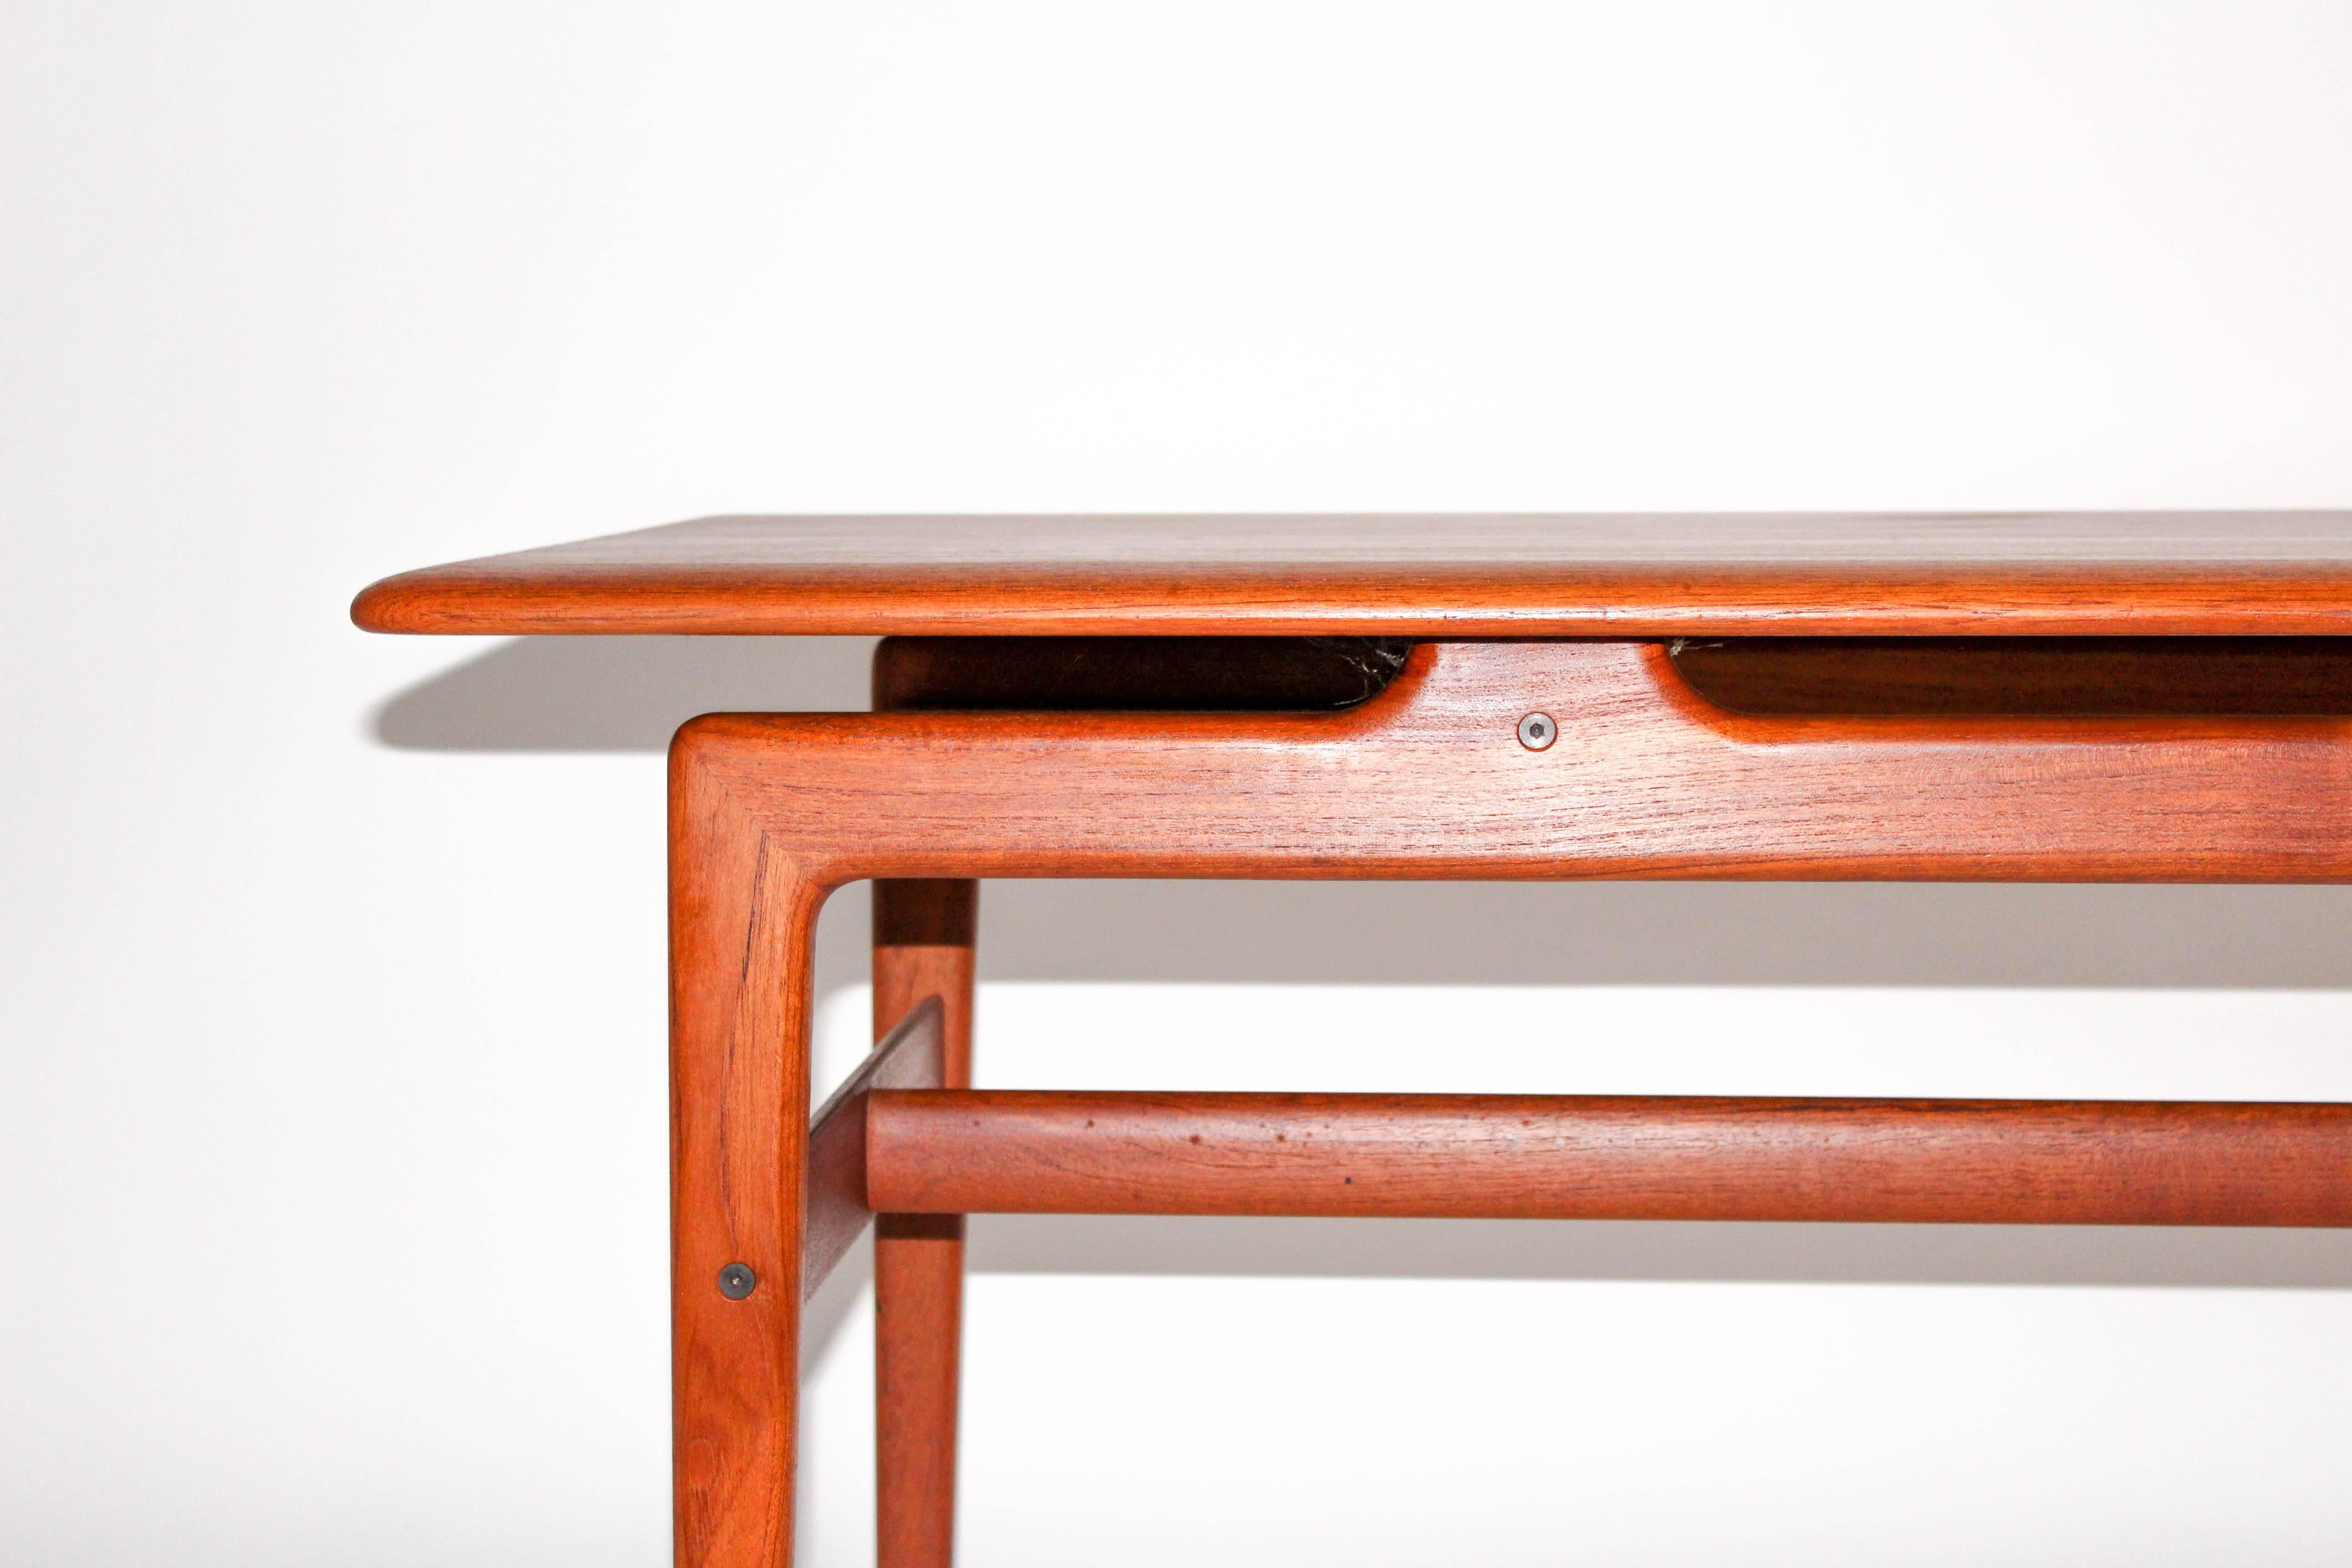 Solid teak coffee table by Danish designers Peter Hvidt and Orla Mølgaard Nielsen. The table has very nice details and shapes. It is in very good vintage condition with some minor signs of usage. 

